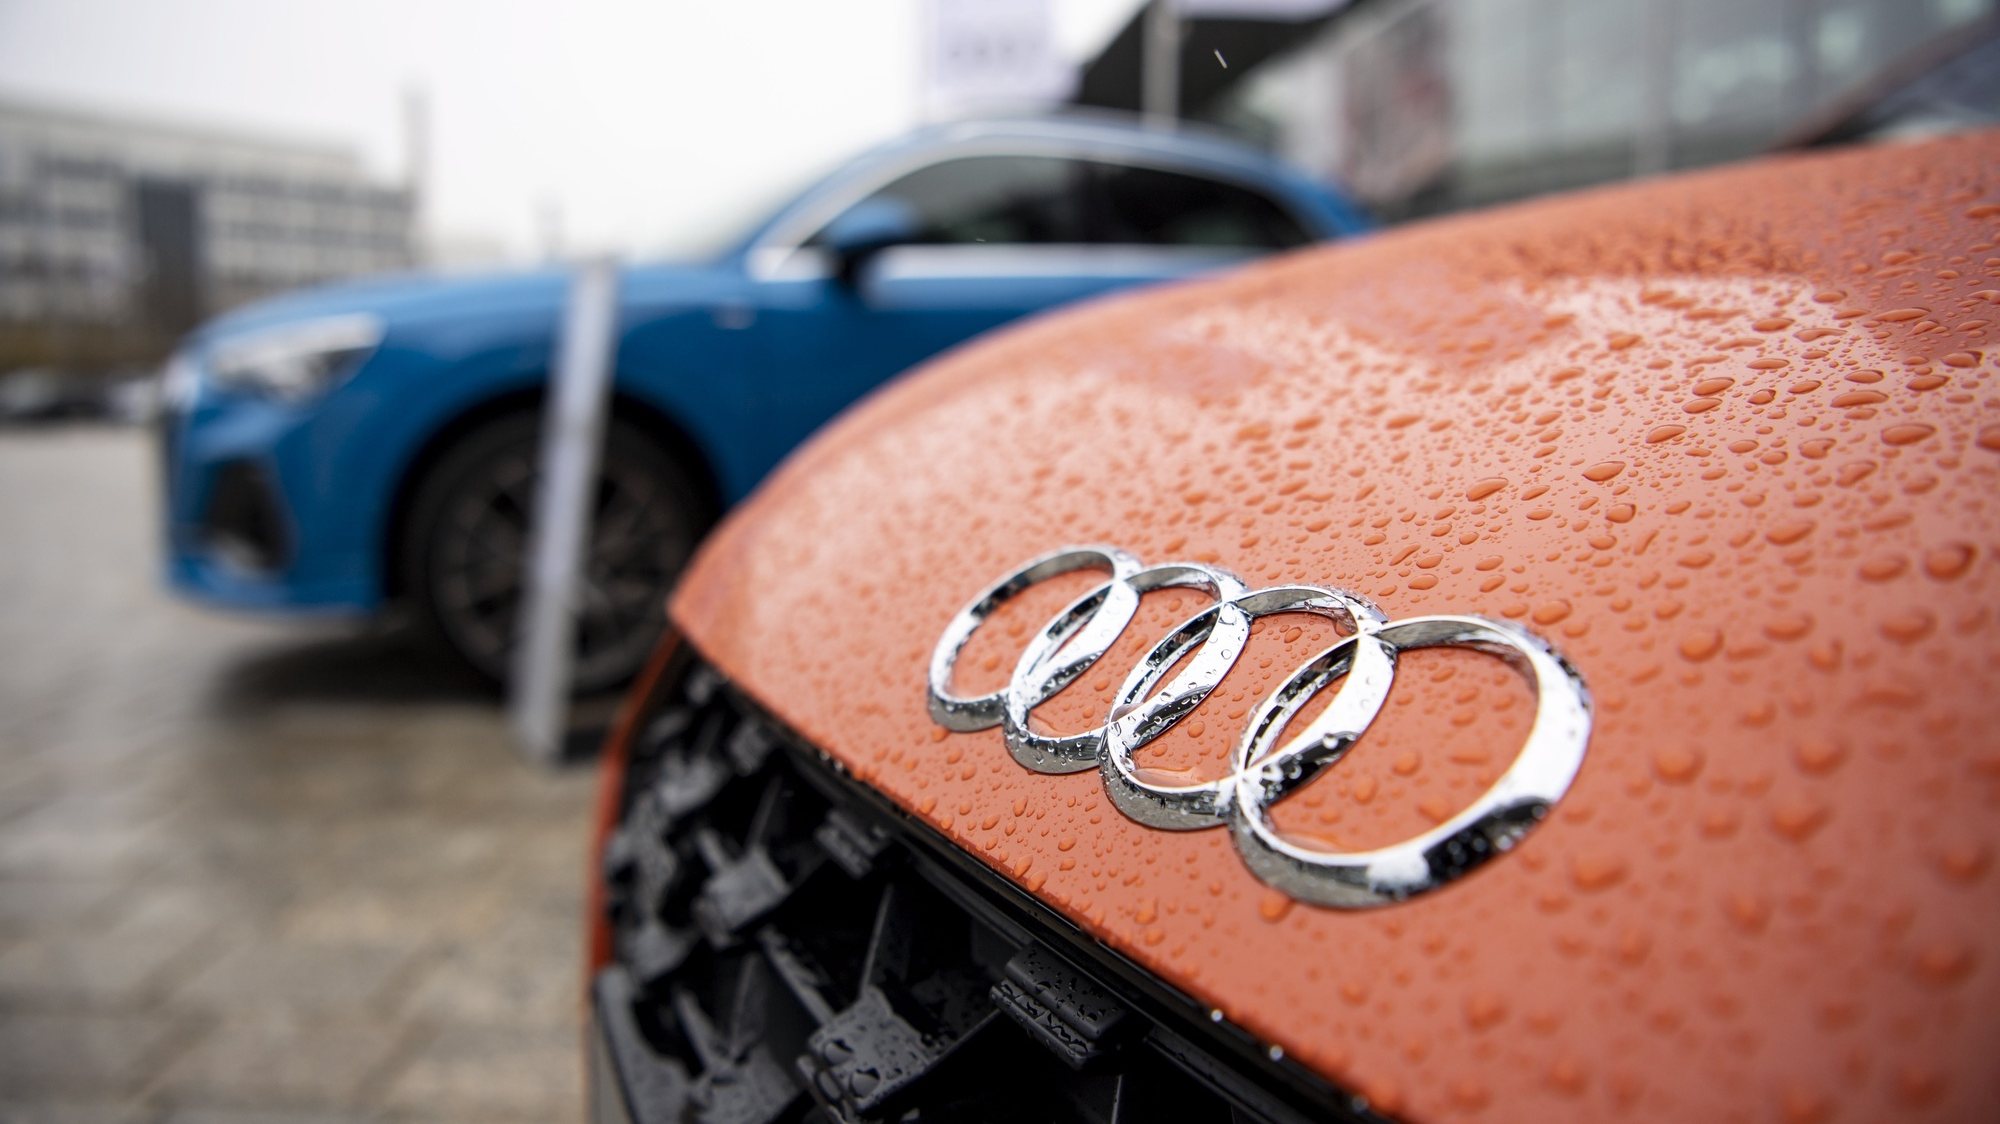 epa07741695 (FILE) - An Audi logo is seen on a car in front of the Audi headquarters during the balance news conference in Ingolstadt, Germany, 14 March 2019 (reissued 26 July 2019). Audi on 26 July 2019 released their 2nd quarter 2019 earnings report, saying deliveries of vehicles to customers fell by 4,5 per cent due to a 5 per cent drop globally in lower demand for automobiles. Audi&#039;s revenue was lower than in the 2nd quarter in 2018 at 28.8 euro (31.2) billion, while operating profit fell to 2.3 billion euro from 2.8 billion in 2018.  EPA/LUKAS BARTH-TUTTAS